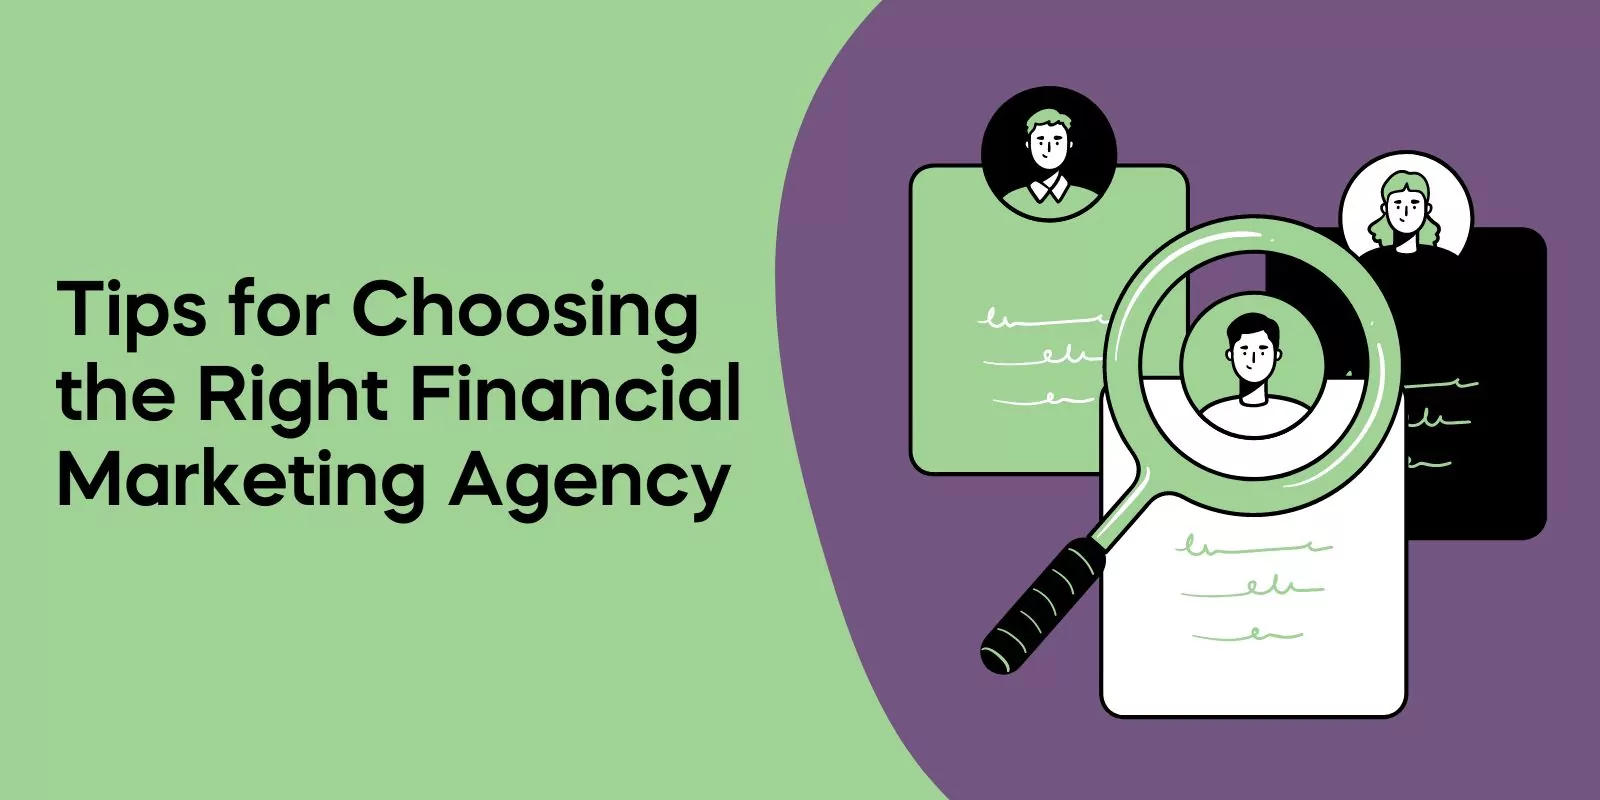 Tips for Choosing the Right Financial Marketing Agency